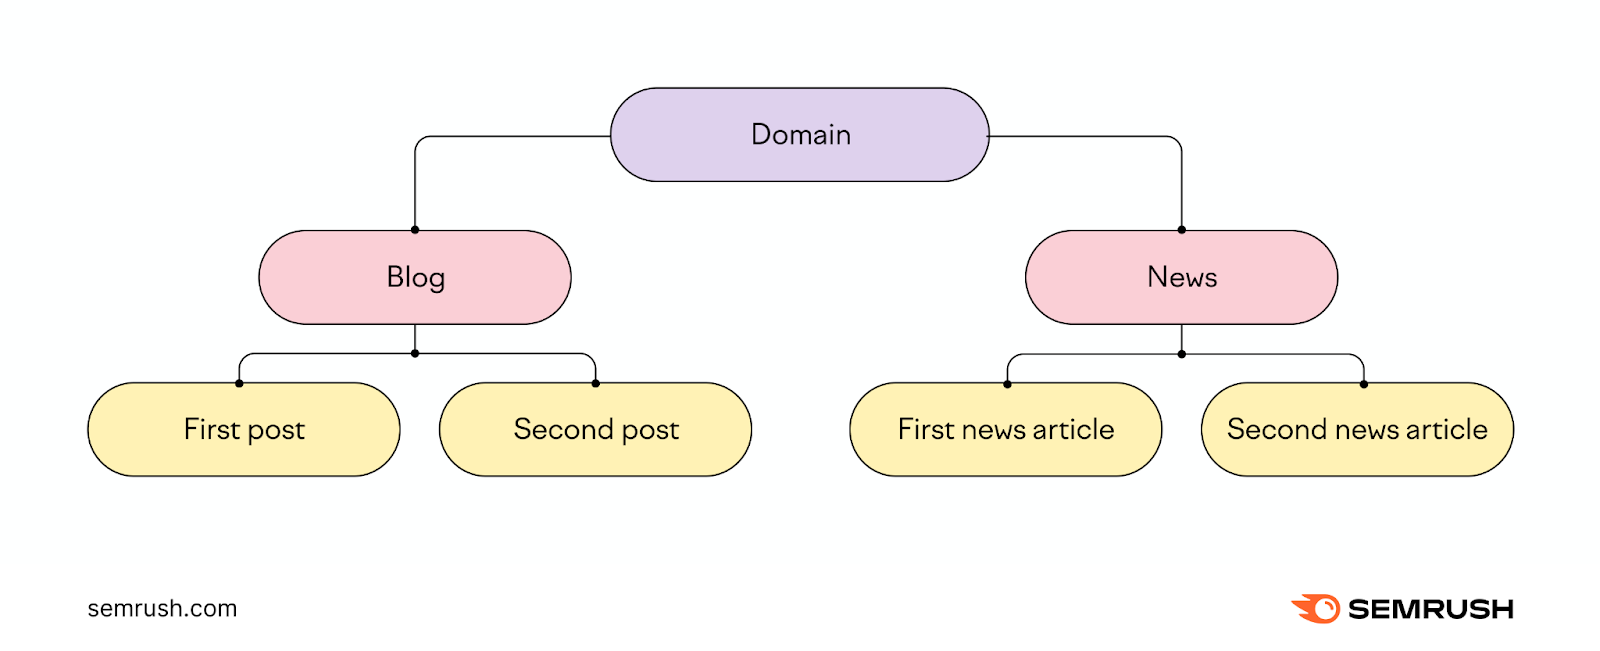 An example of domain's directory structure